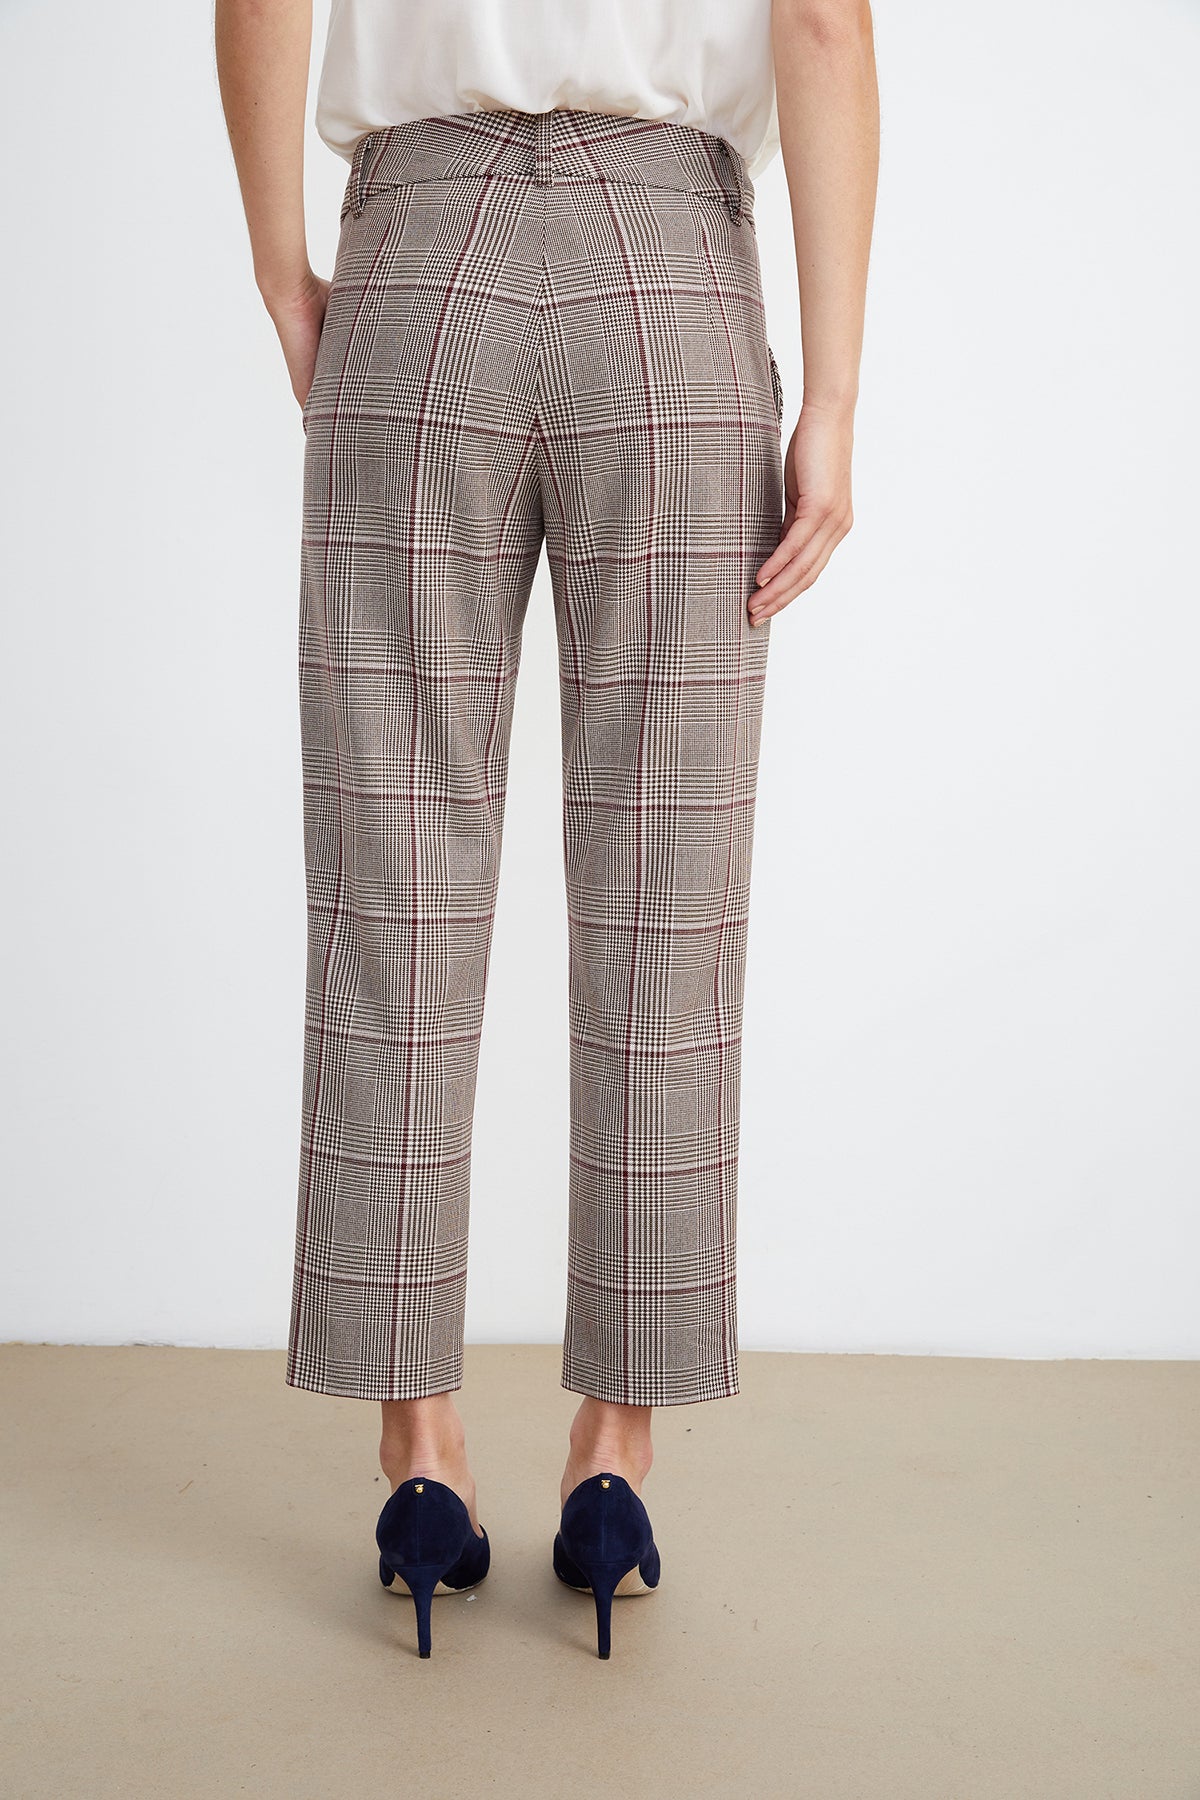 Plaid Pants Women Pants Checkered Pants Loose Straight Wide-Leg Pants Wild  Straight Casual Pants (Color : Blue, Size : Large) : Amazon.ca: Clothing,  Shoes & Accessories